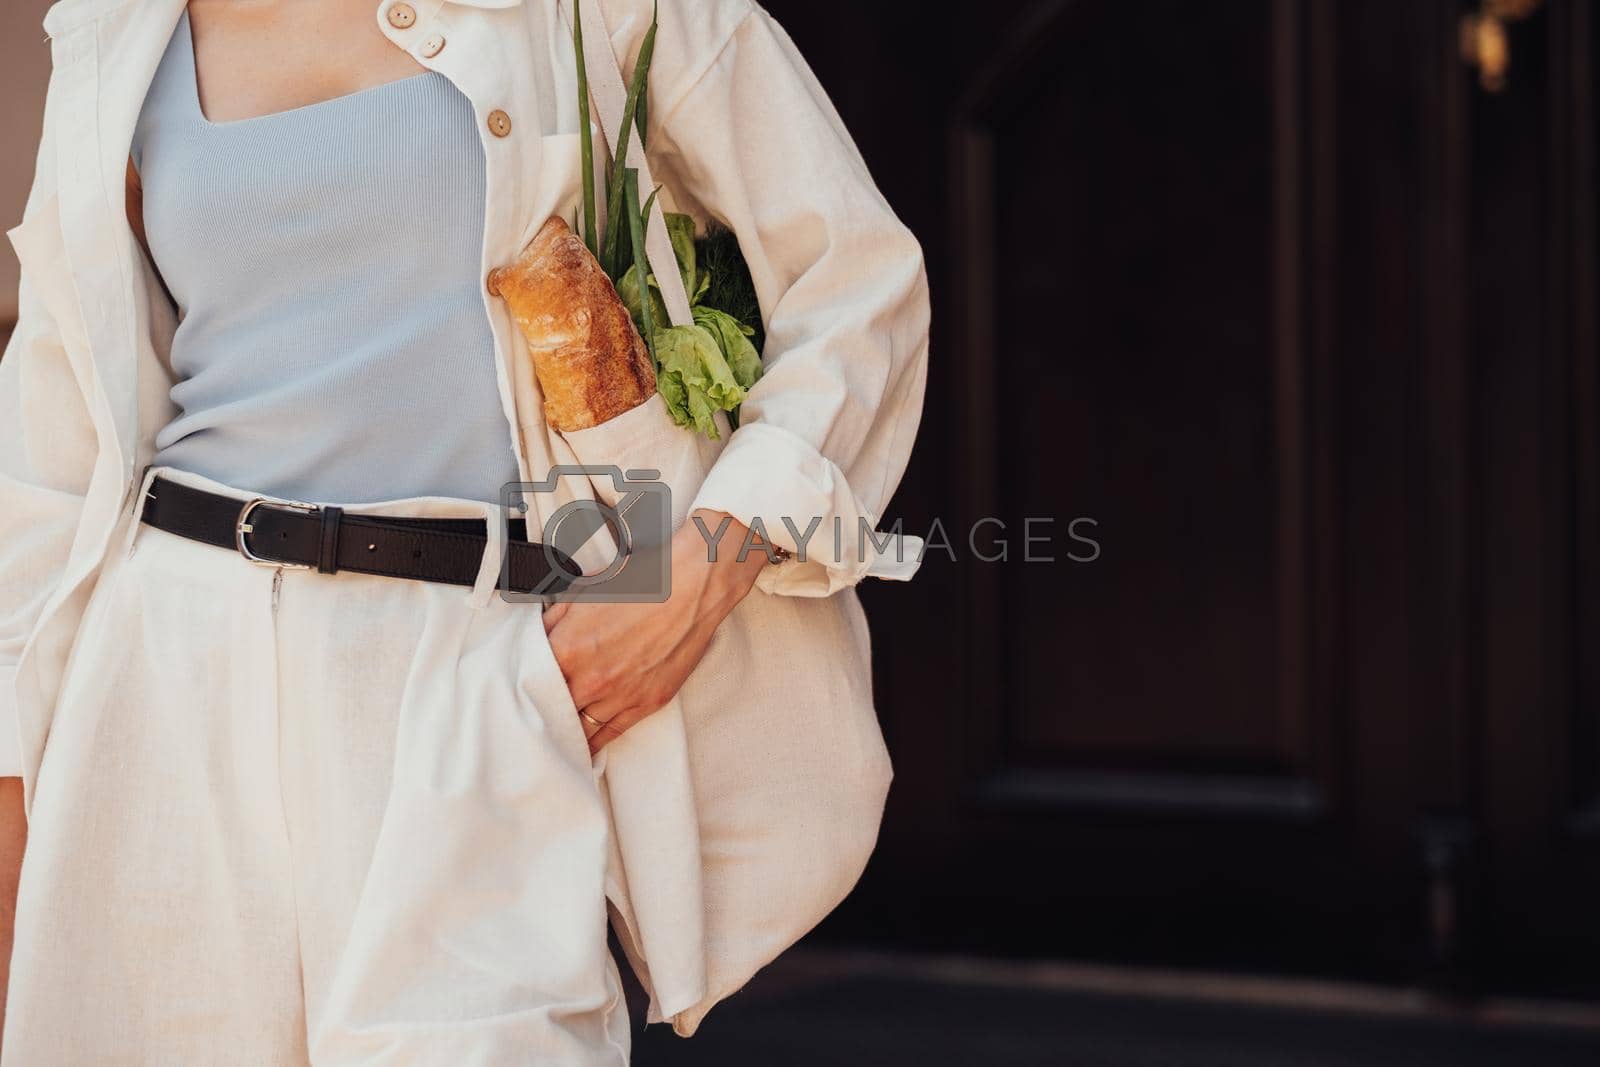 Royalty free image of Unrecognisable Stylish Woman Holding Shopping Eco Bag with Groceries Outdoors, Copy Space by Romvy